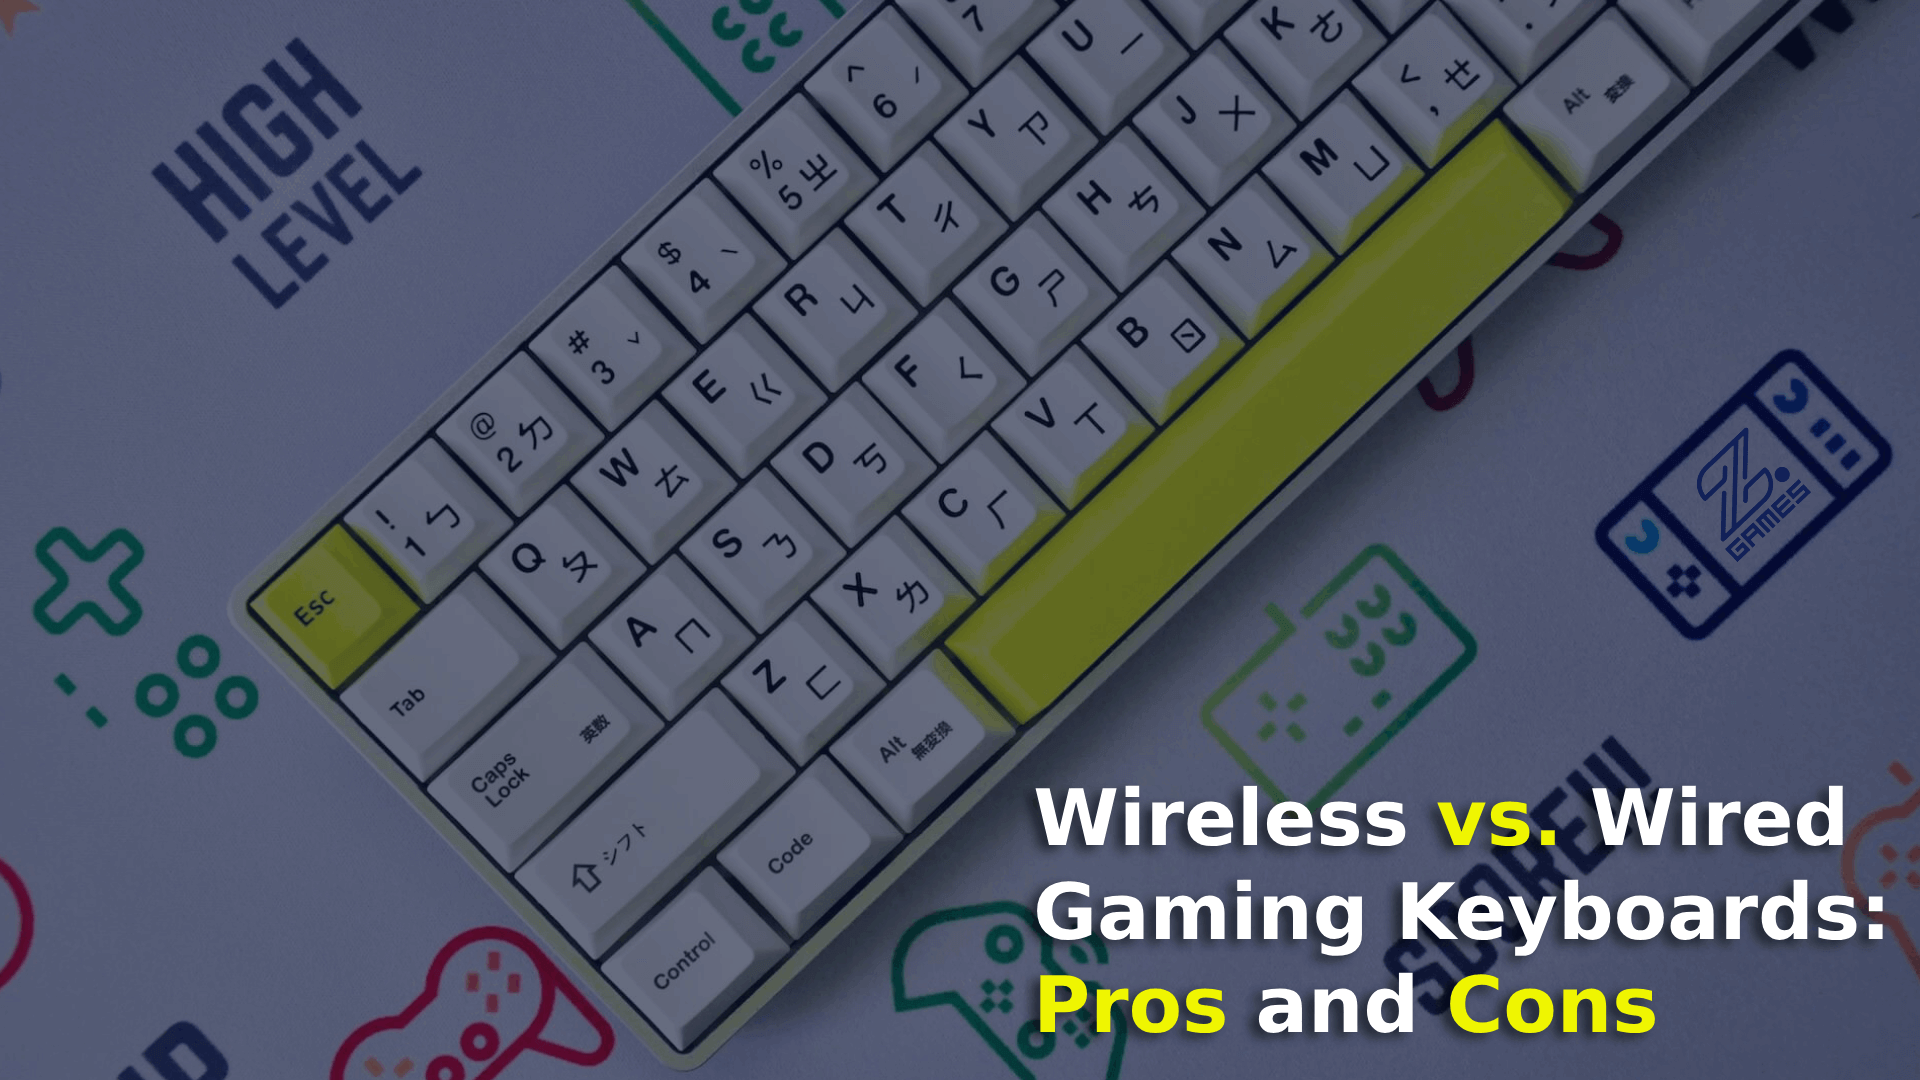 Wireless vs. Wired Gaming Keyboards: Pros and Cons